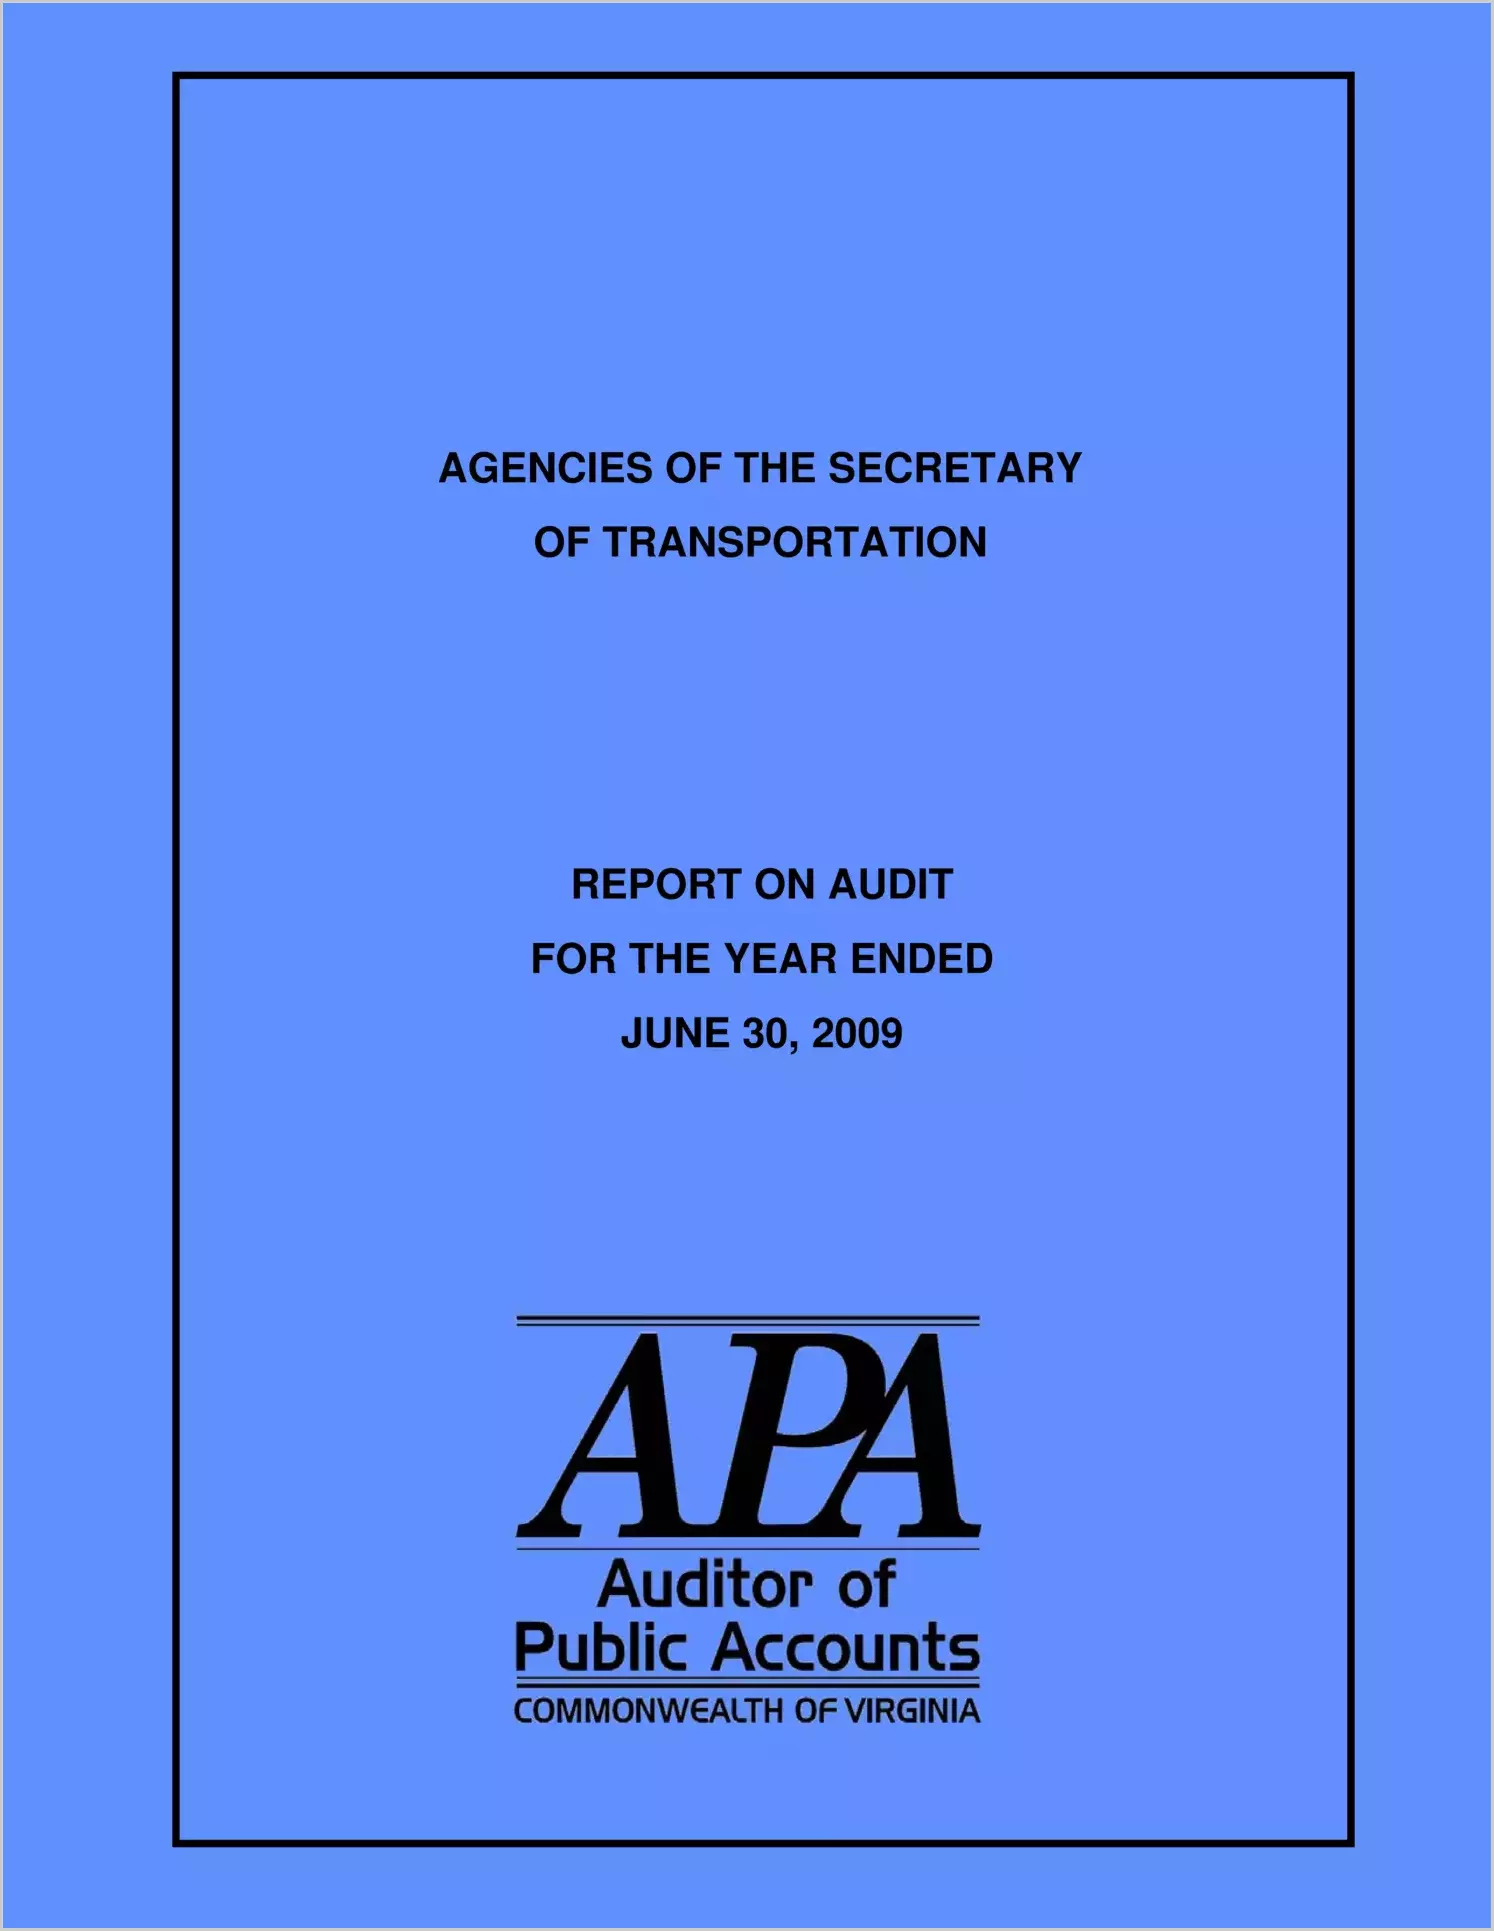 Agencies of the Secretary of Transportation for the year ended June 30, 2009